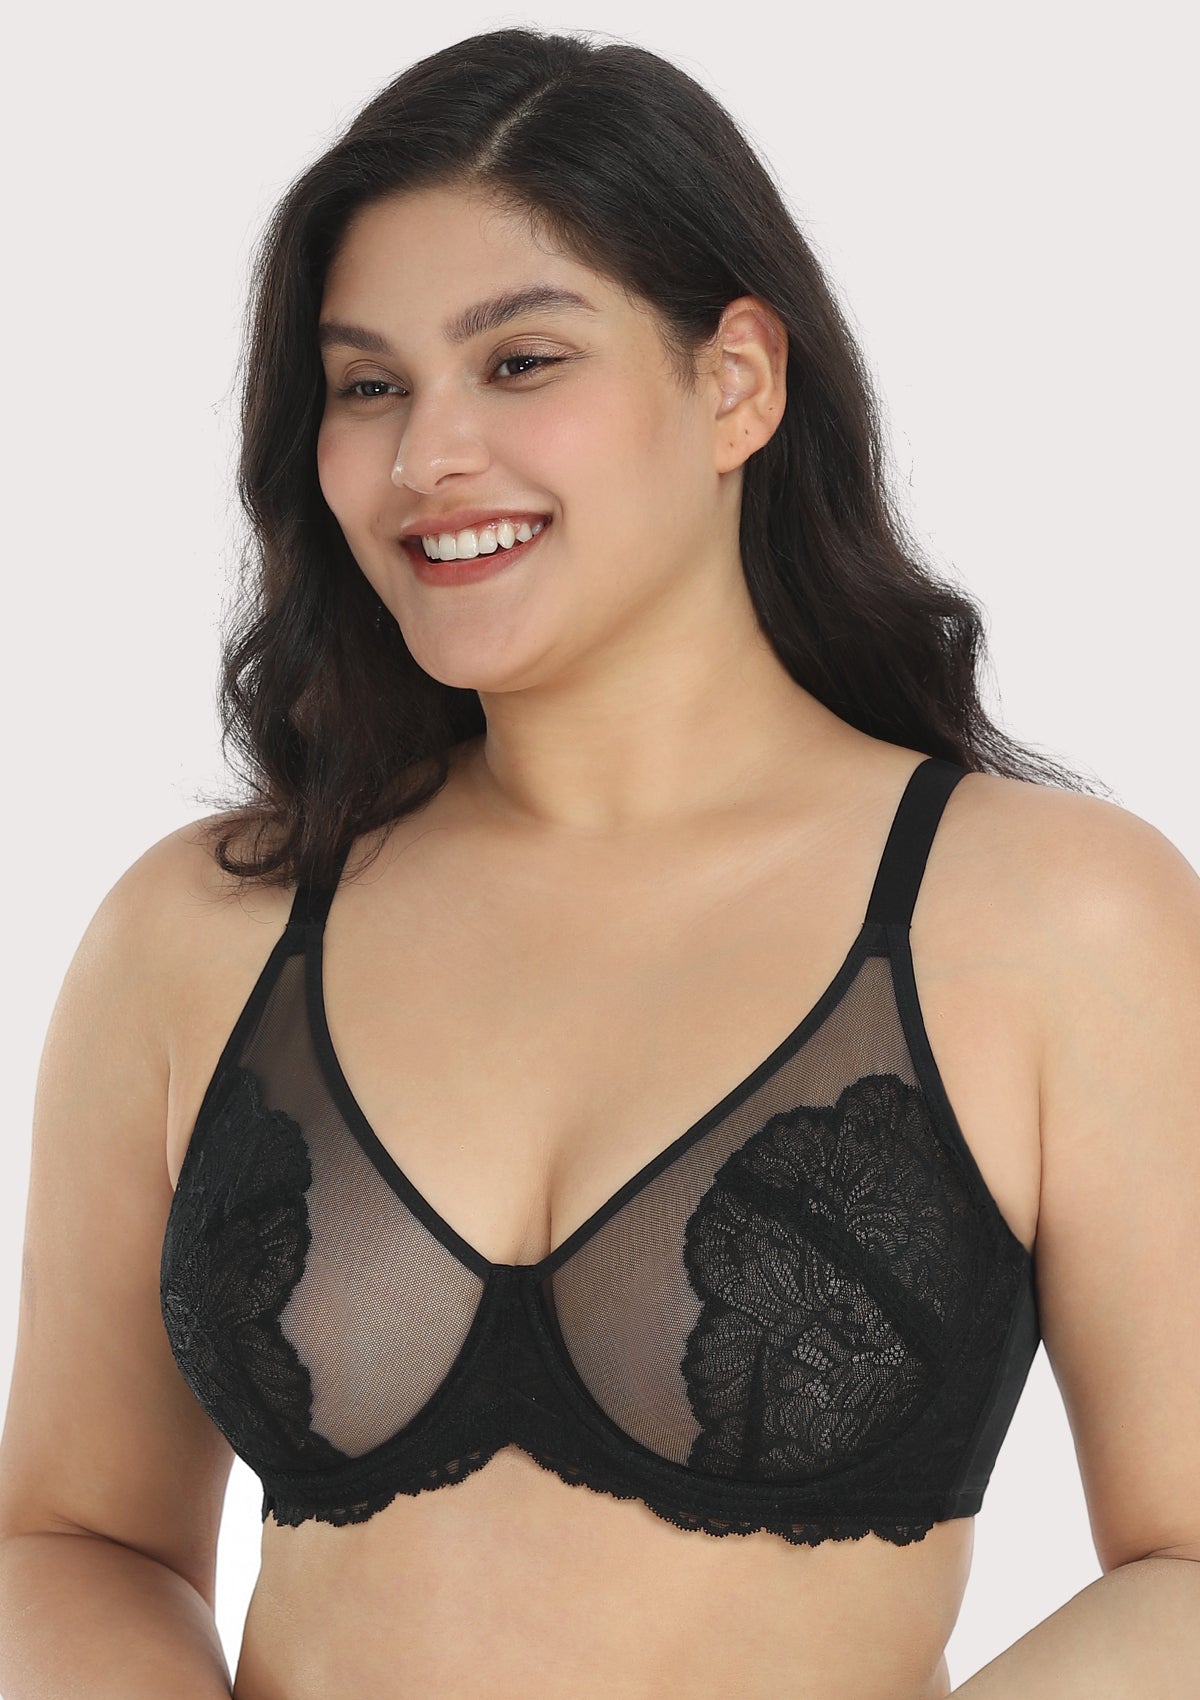 HSIA Blossom Matching Bra And Panties: Beautiful Everyday Bra - Black Contrast Apricot / 42 / D